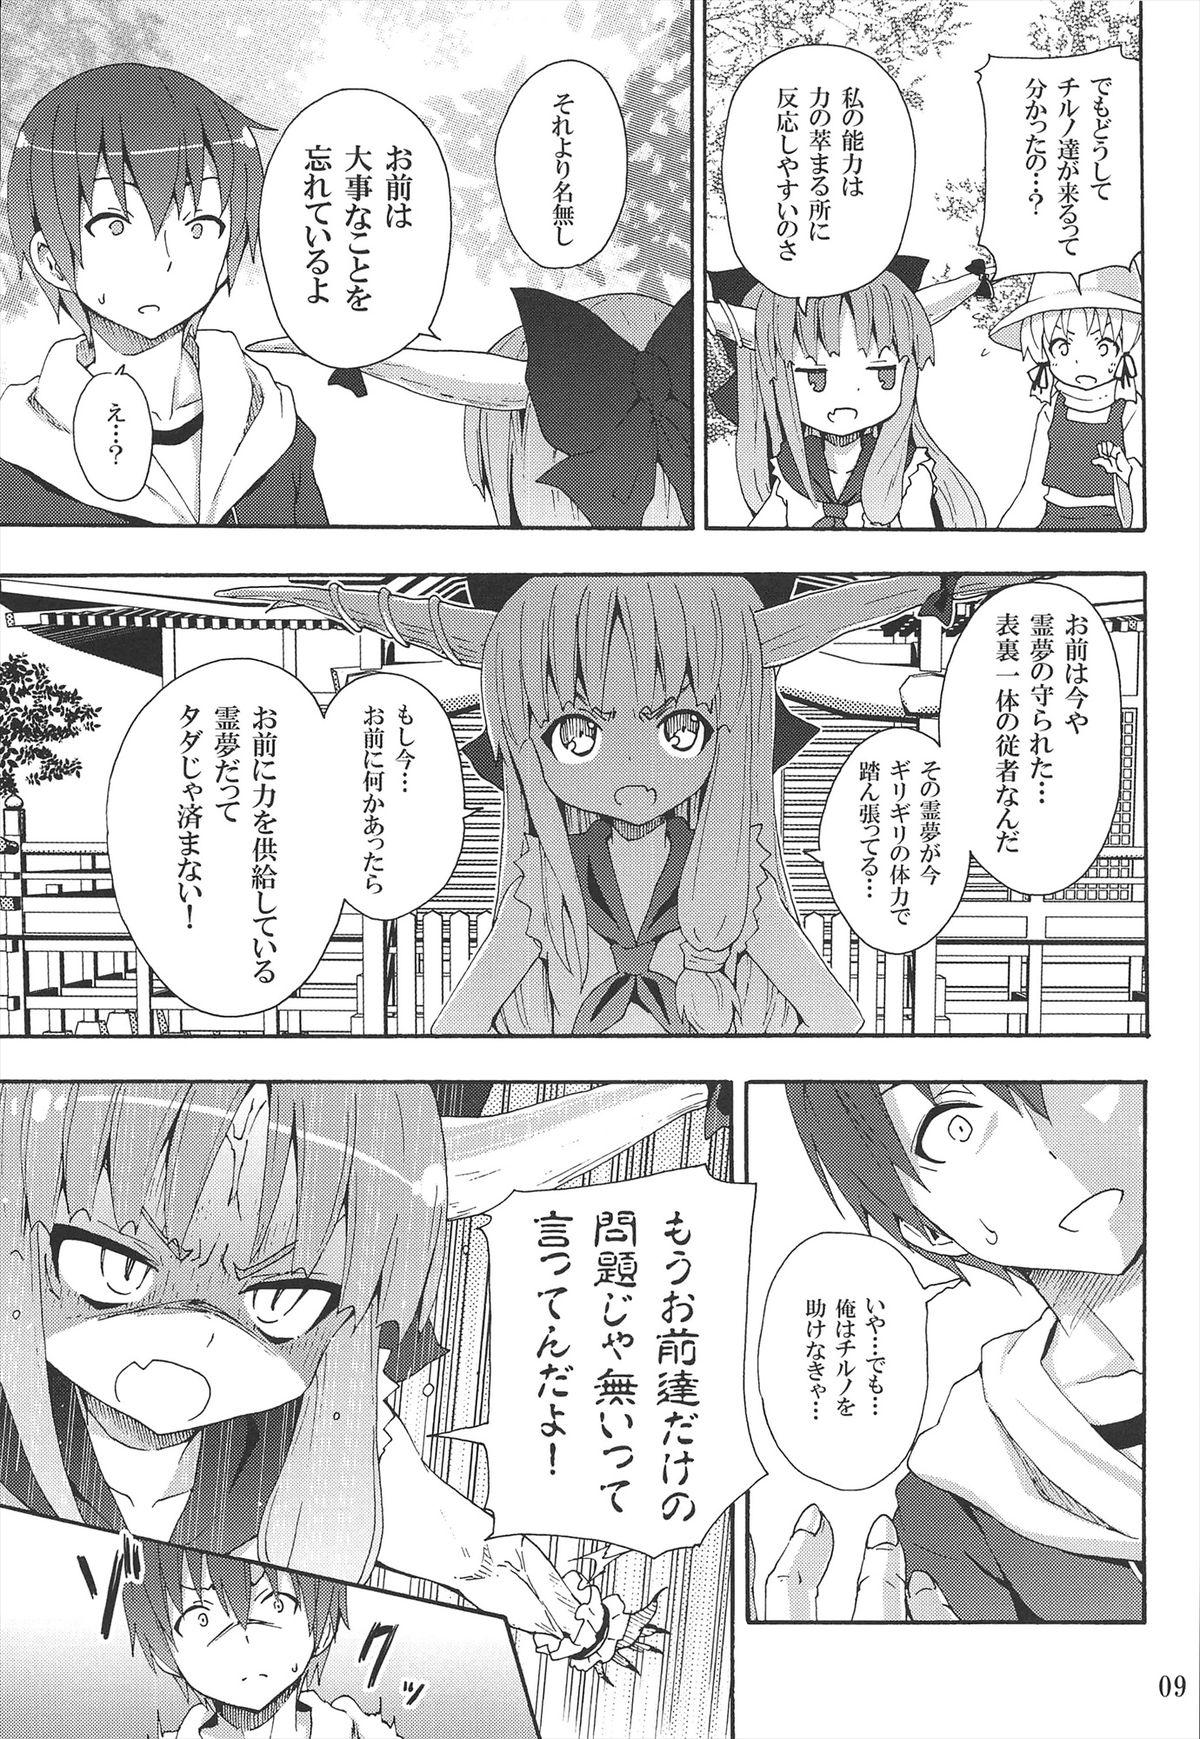 Shaved To Aru Suika no Shuchi Nikurin - Touhou project Missionary Position Porn - Page 11